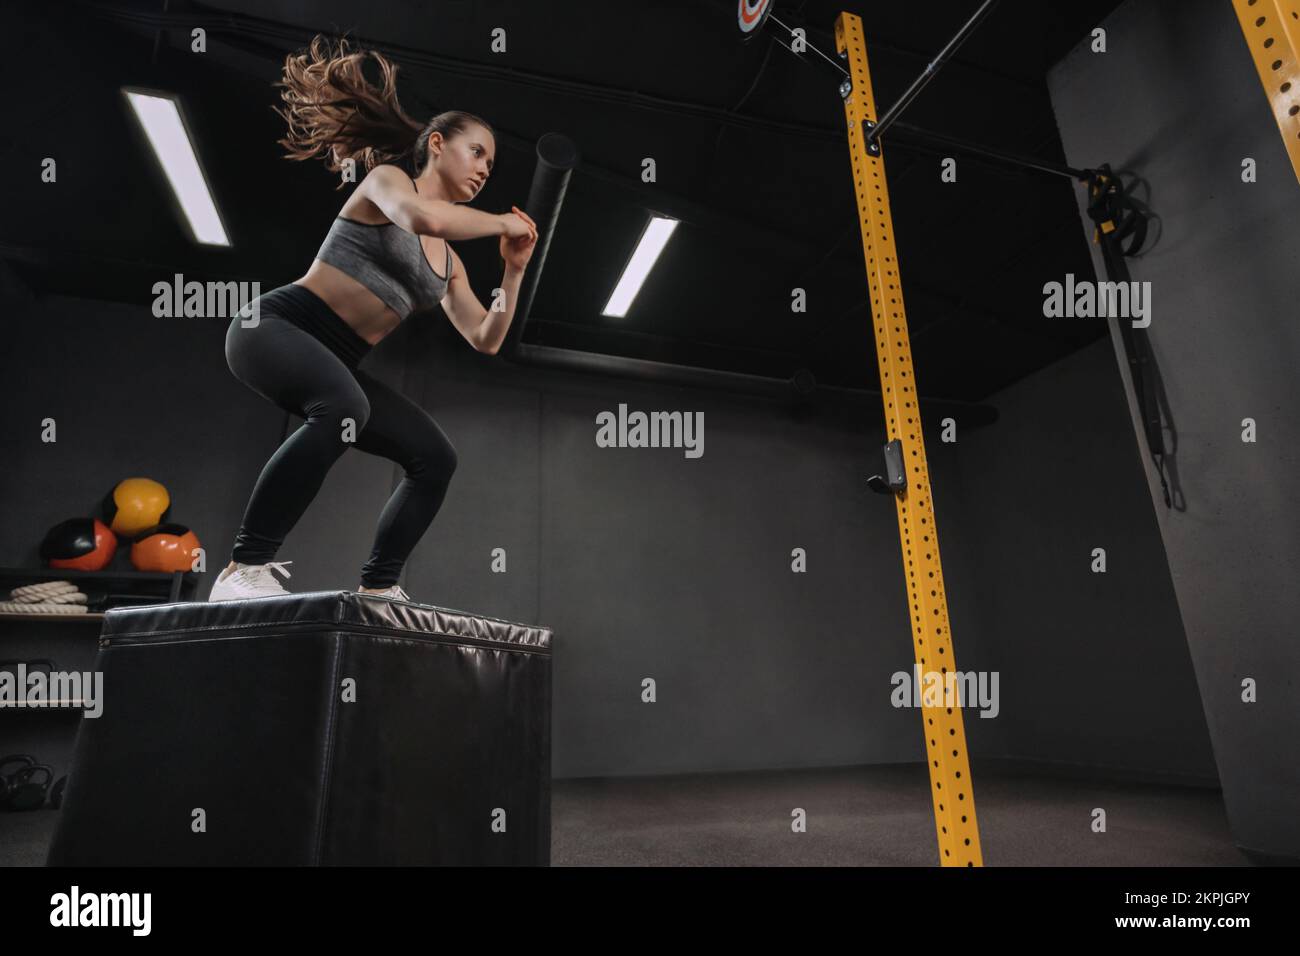 Woman doing box jump exercise as part of her crossfit training. Female athlete doing squats and jumping onto the box in dark workout gym. Copy space Stock Photo